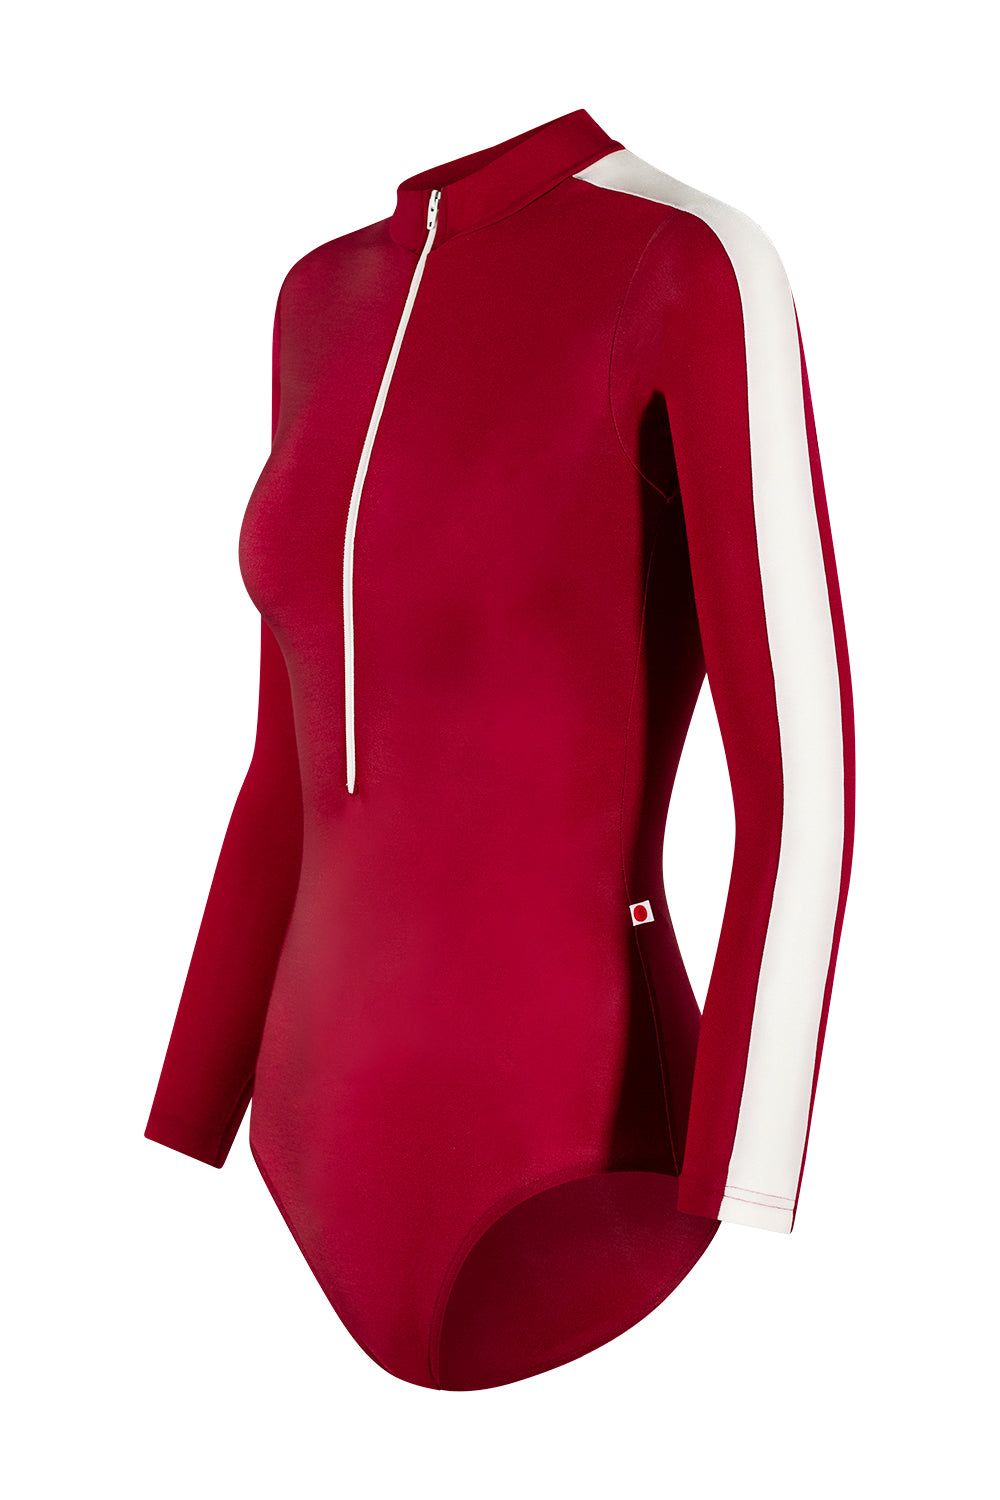 Jessica leotard in N-Berry body color with T-White side stripe and long sleeves